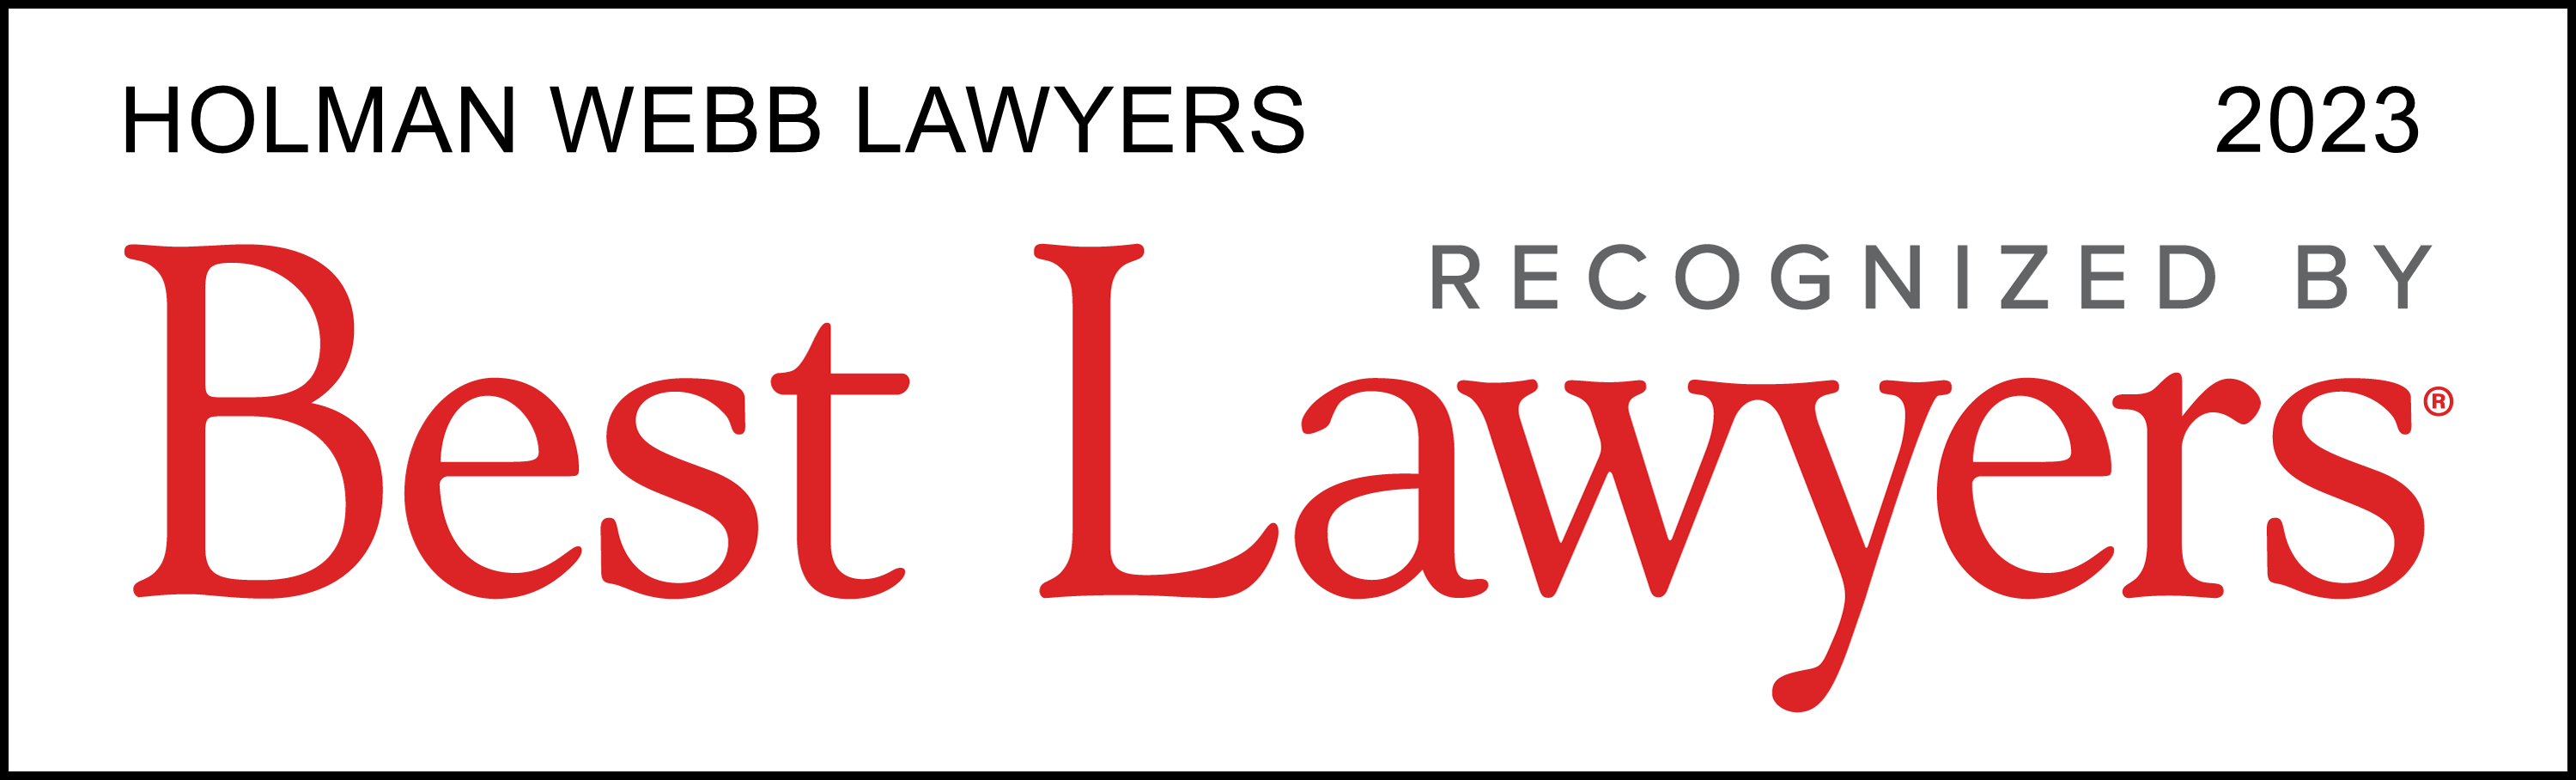 Eight lawyers included in The Best Lawyers in Australia, and Best Lawyers: Ones to Watch in Australia 2023